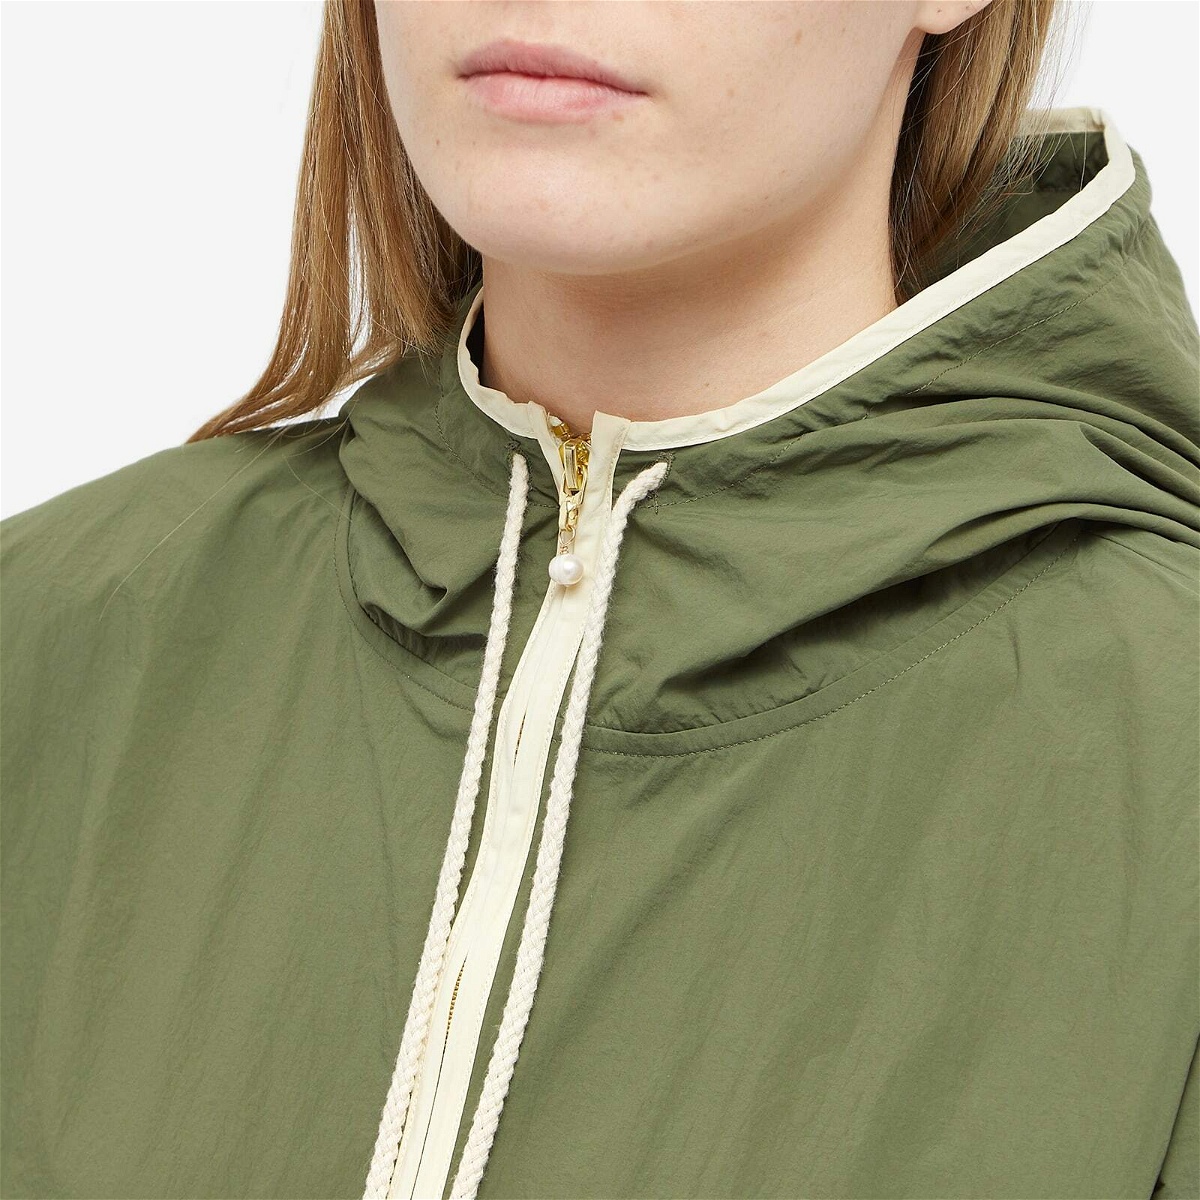 DONNI. Women's Nylon Pullover Jacket in Rosemary DONNI.